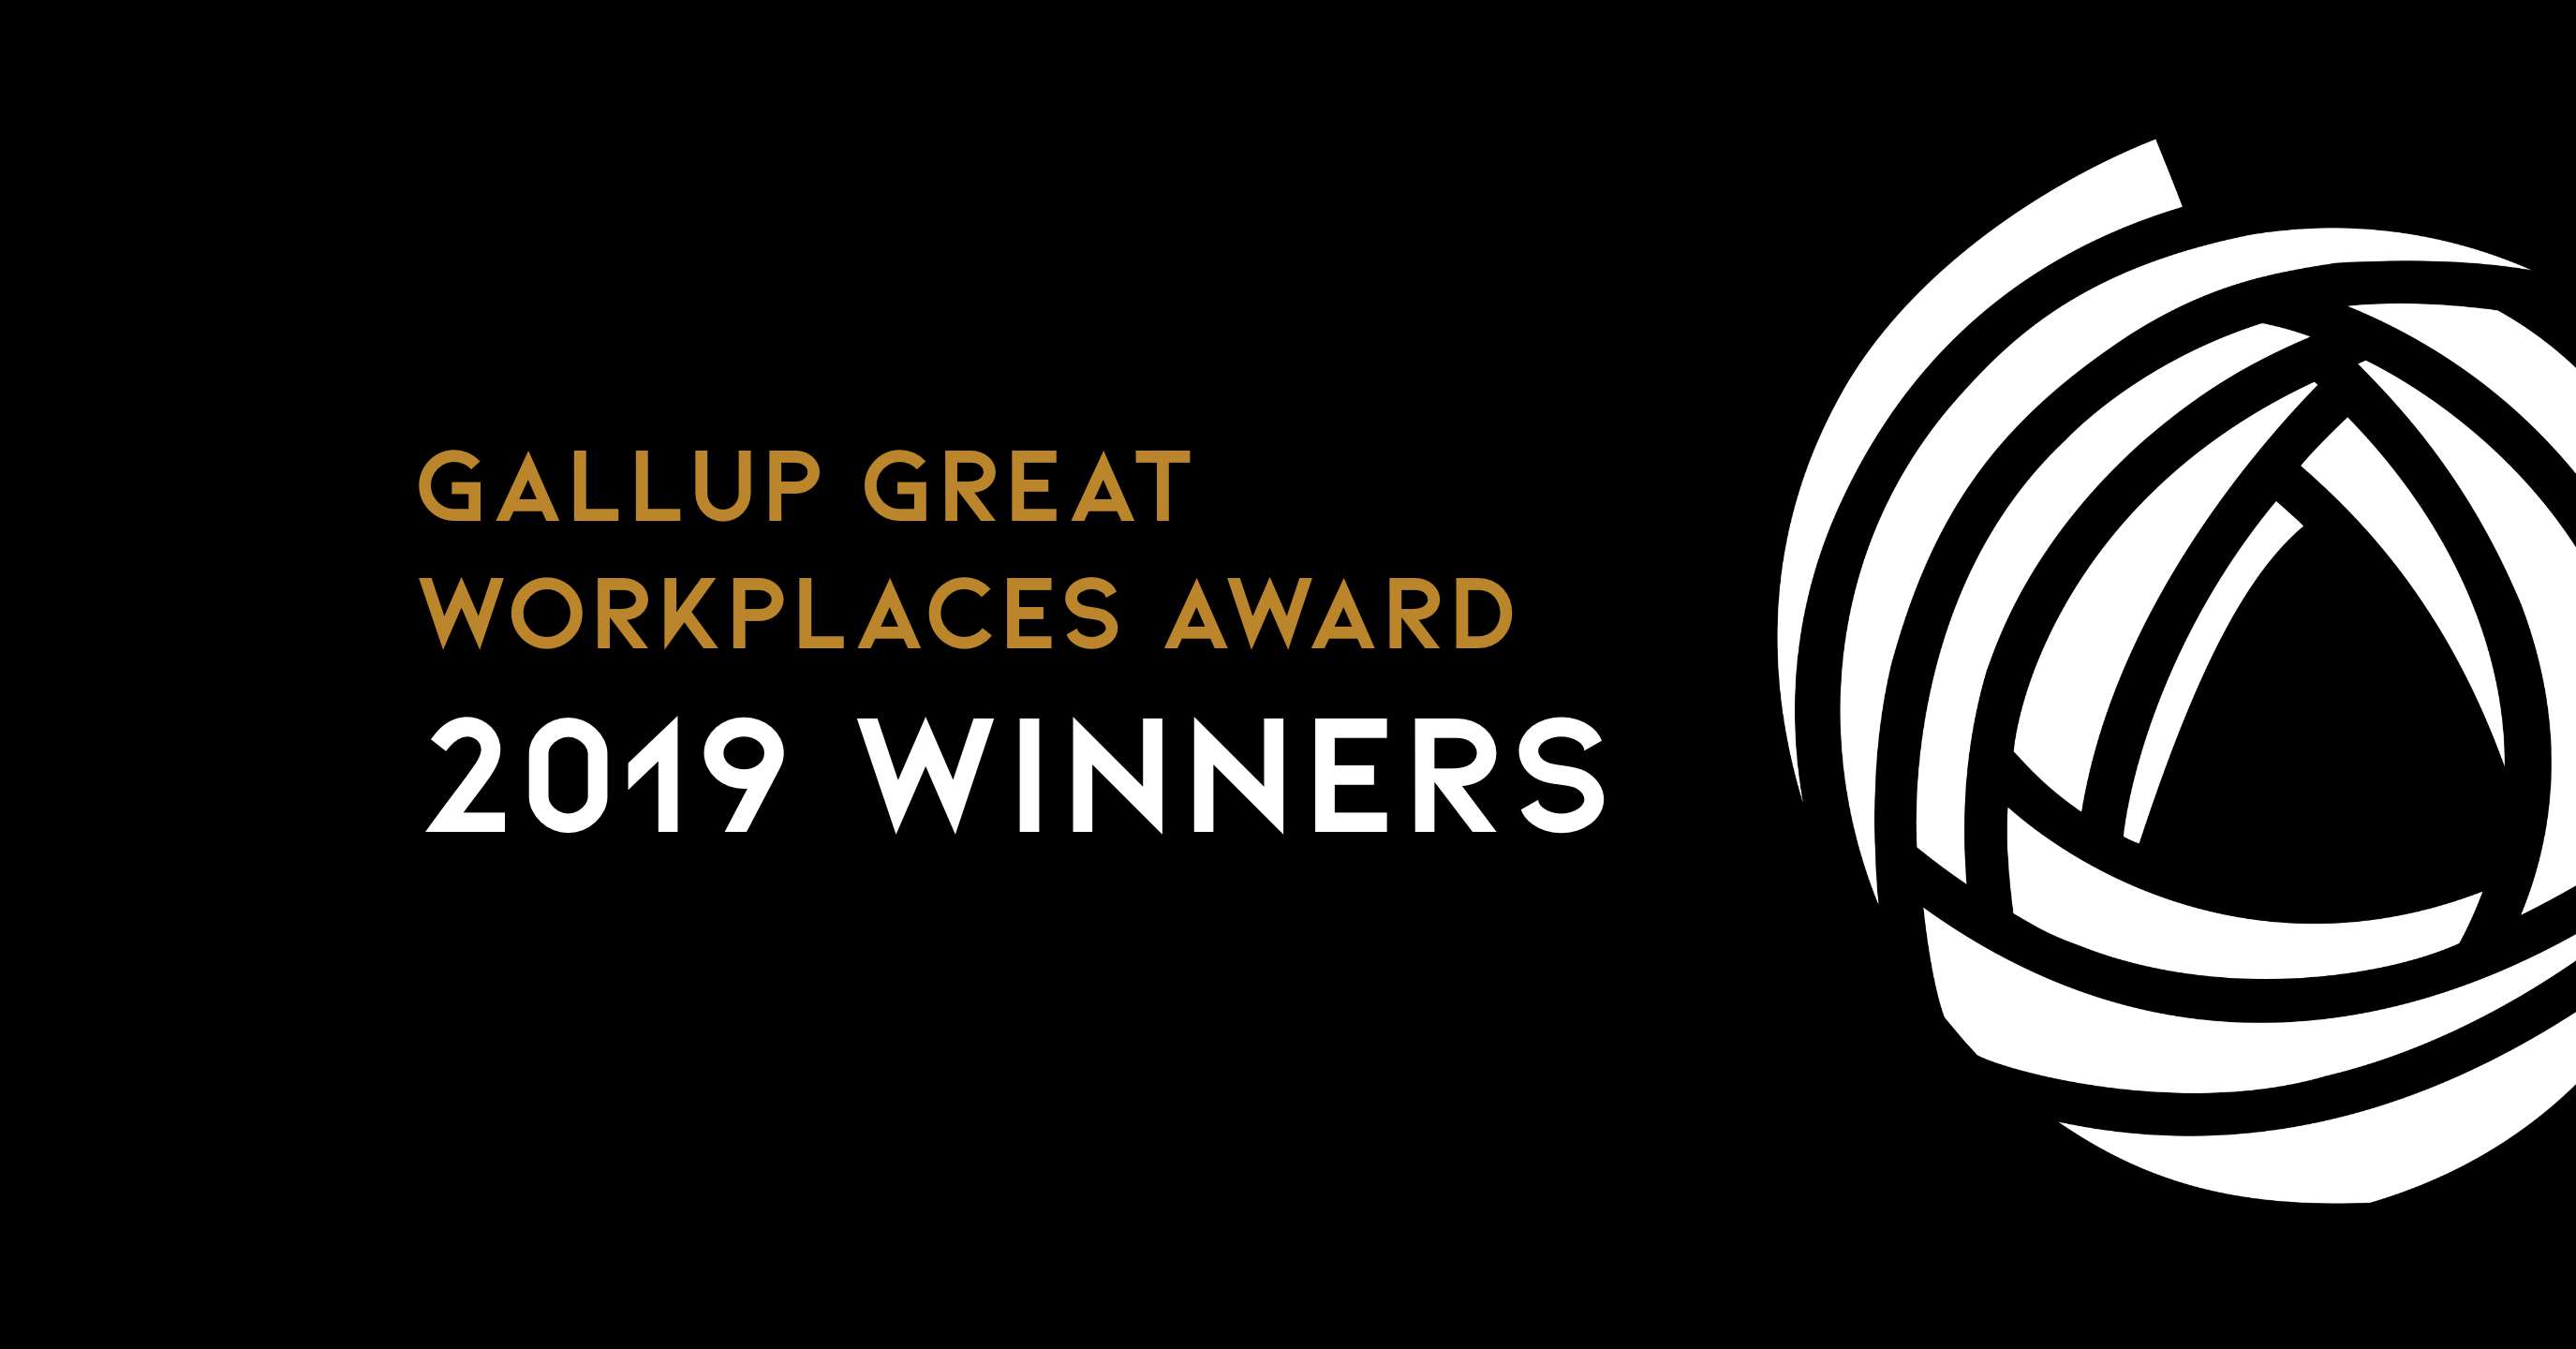 The 2019 Gallup Great Workplace Award Recipients